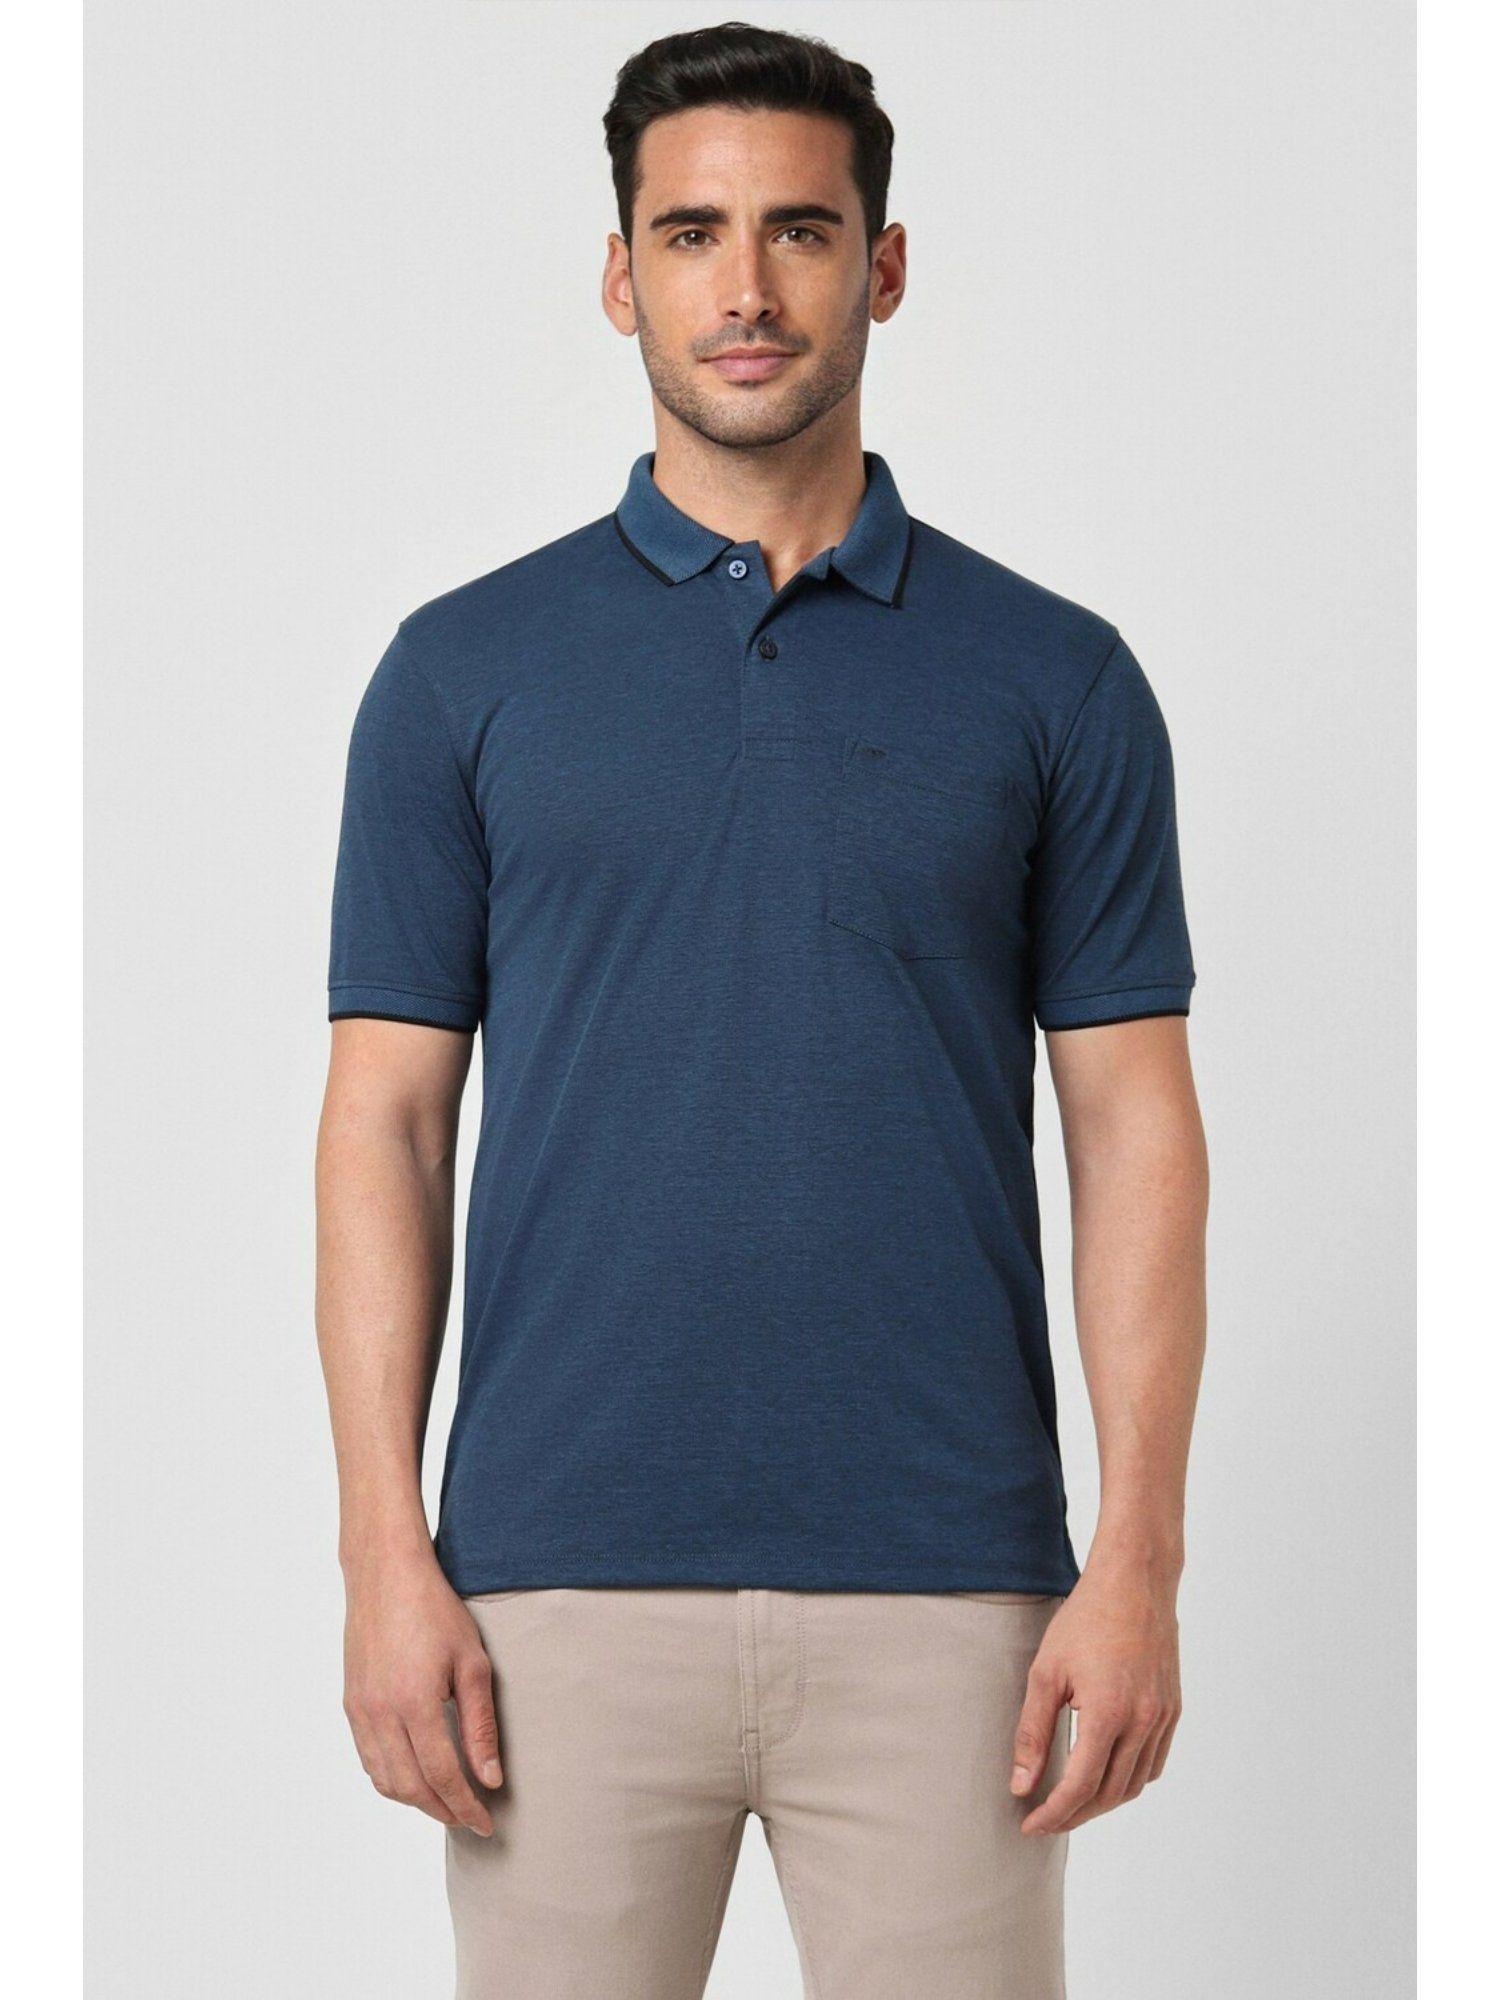 mens navy blue solid polo neck polo t-shirt